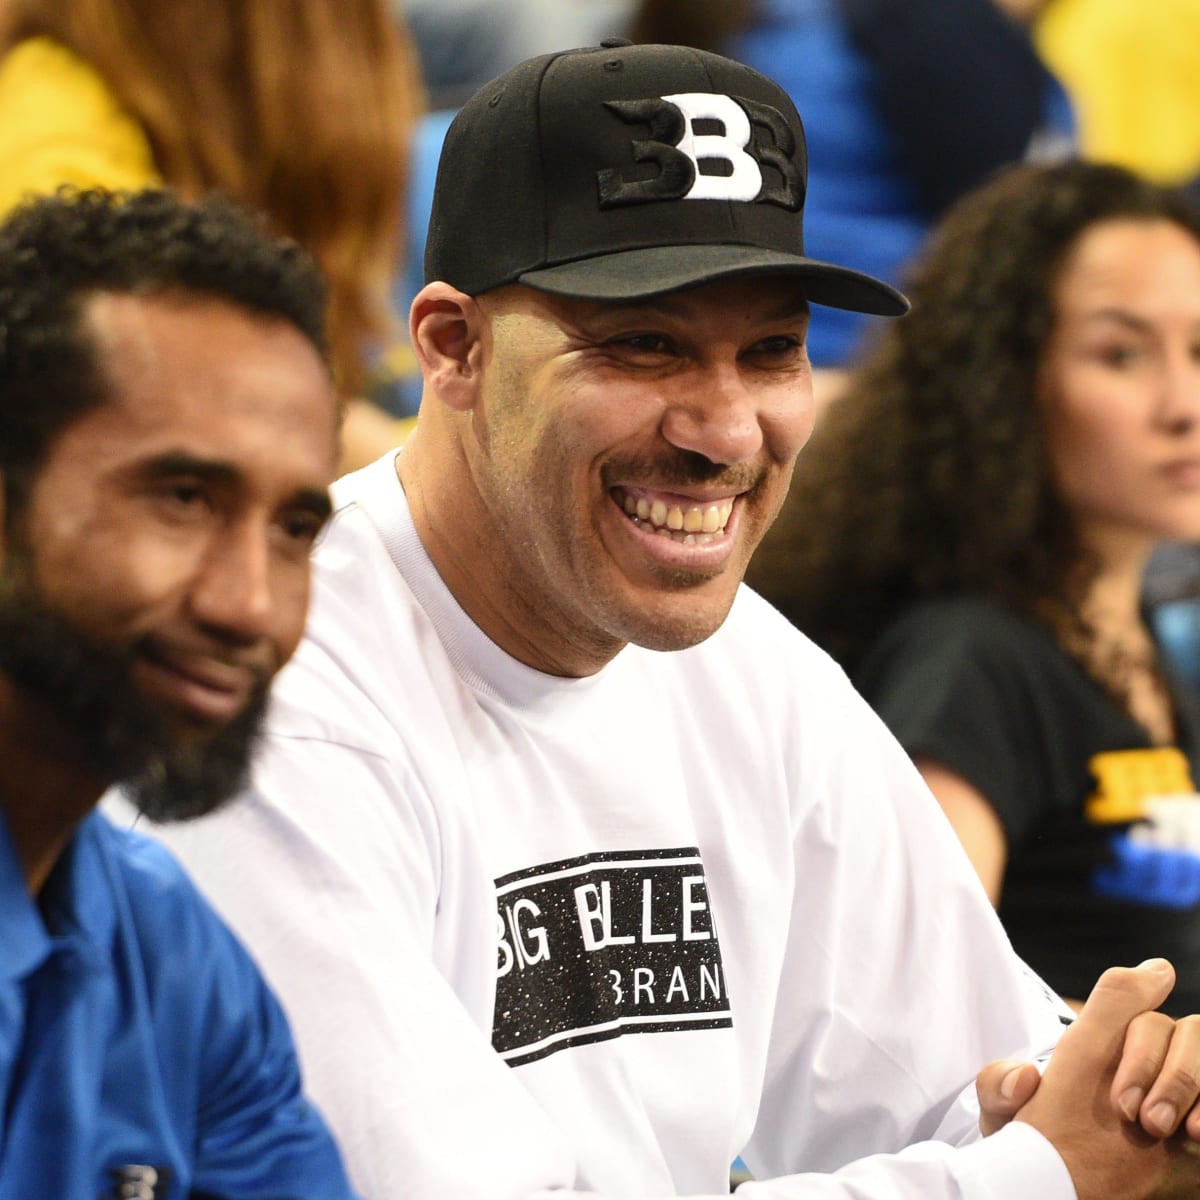 Who is Lonzo Ball's dad, LaVar Ball?